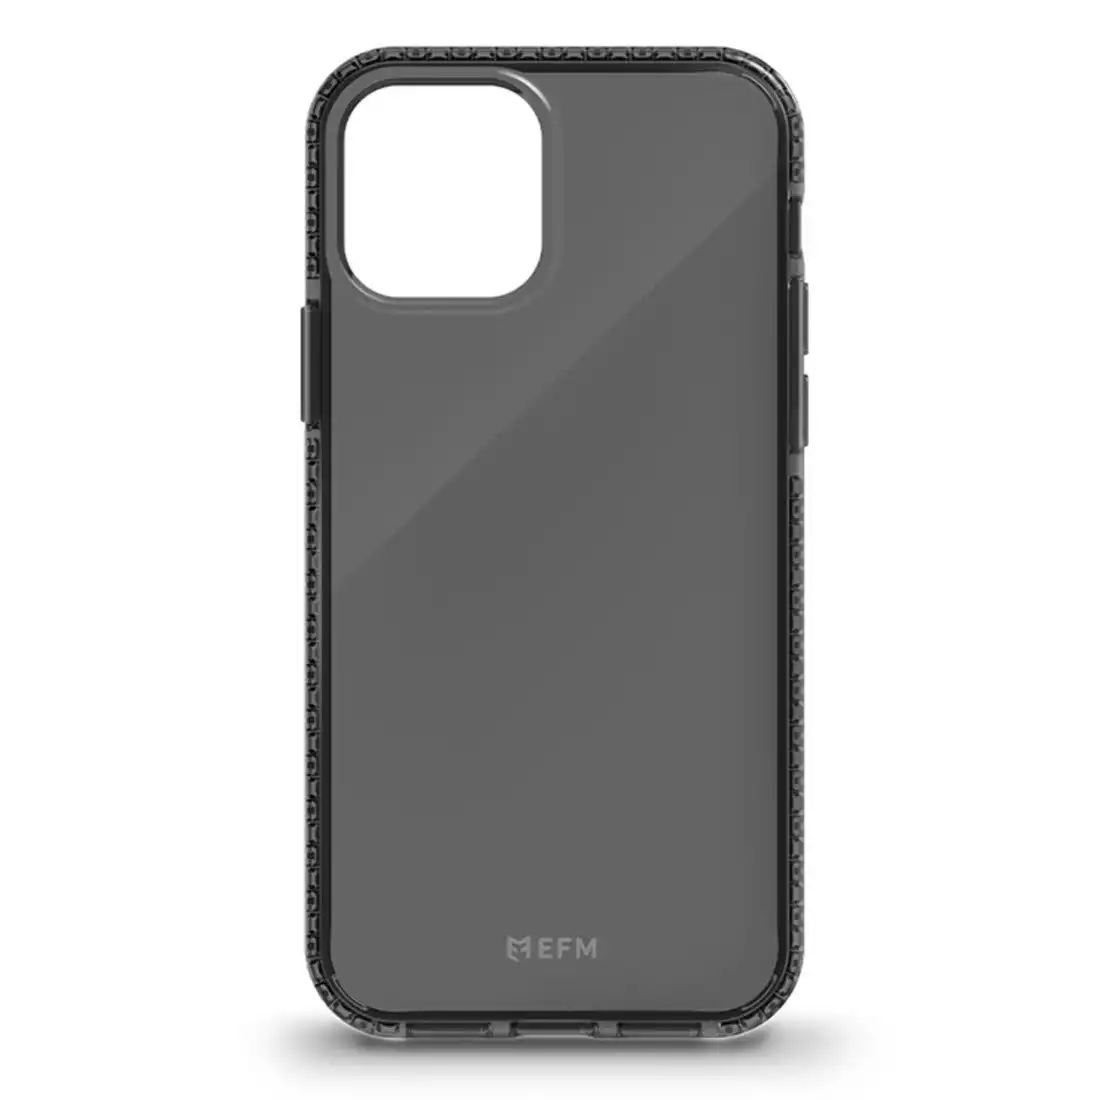 EFM Zurich Case Armour Protection For iPhone 12 Pro Max - Smoke Black